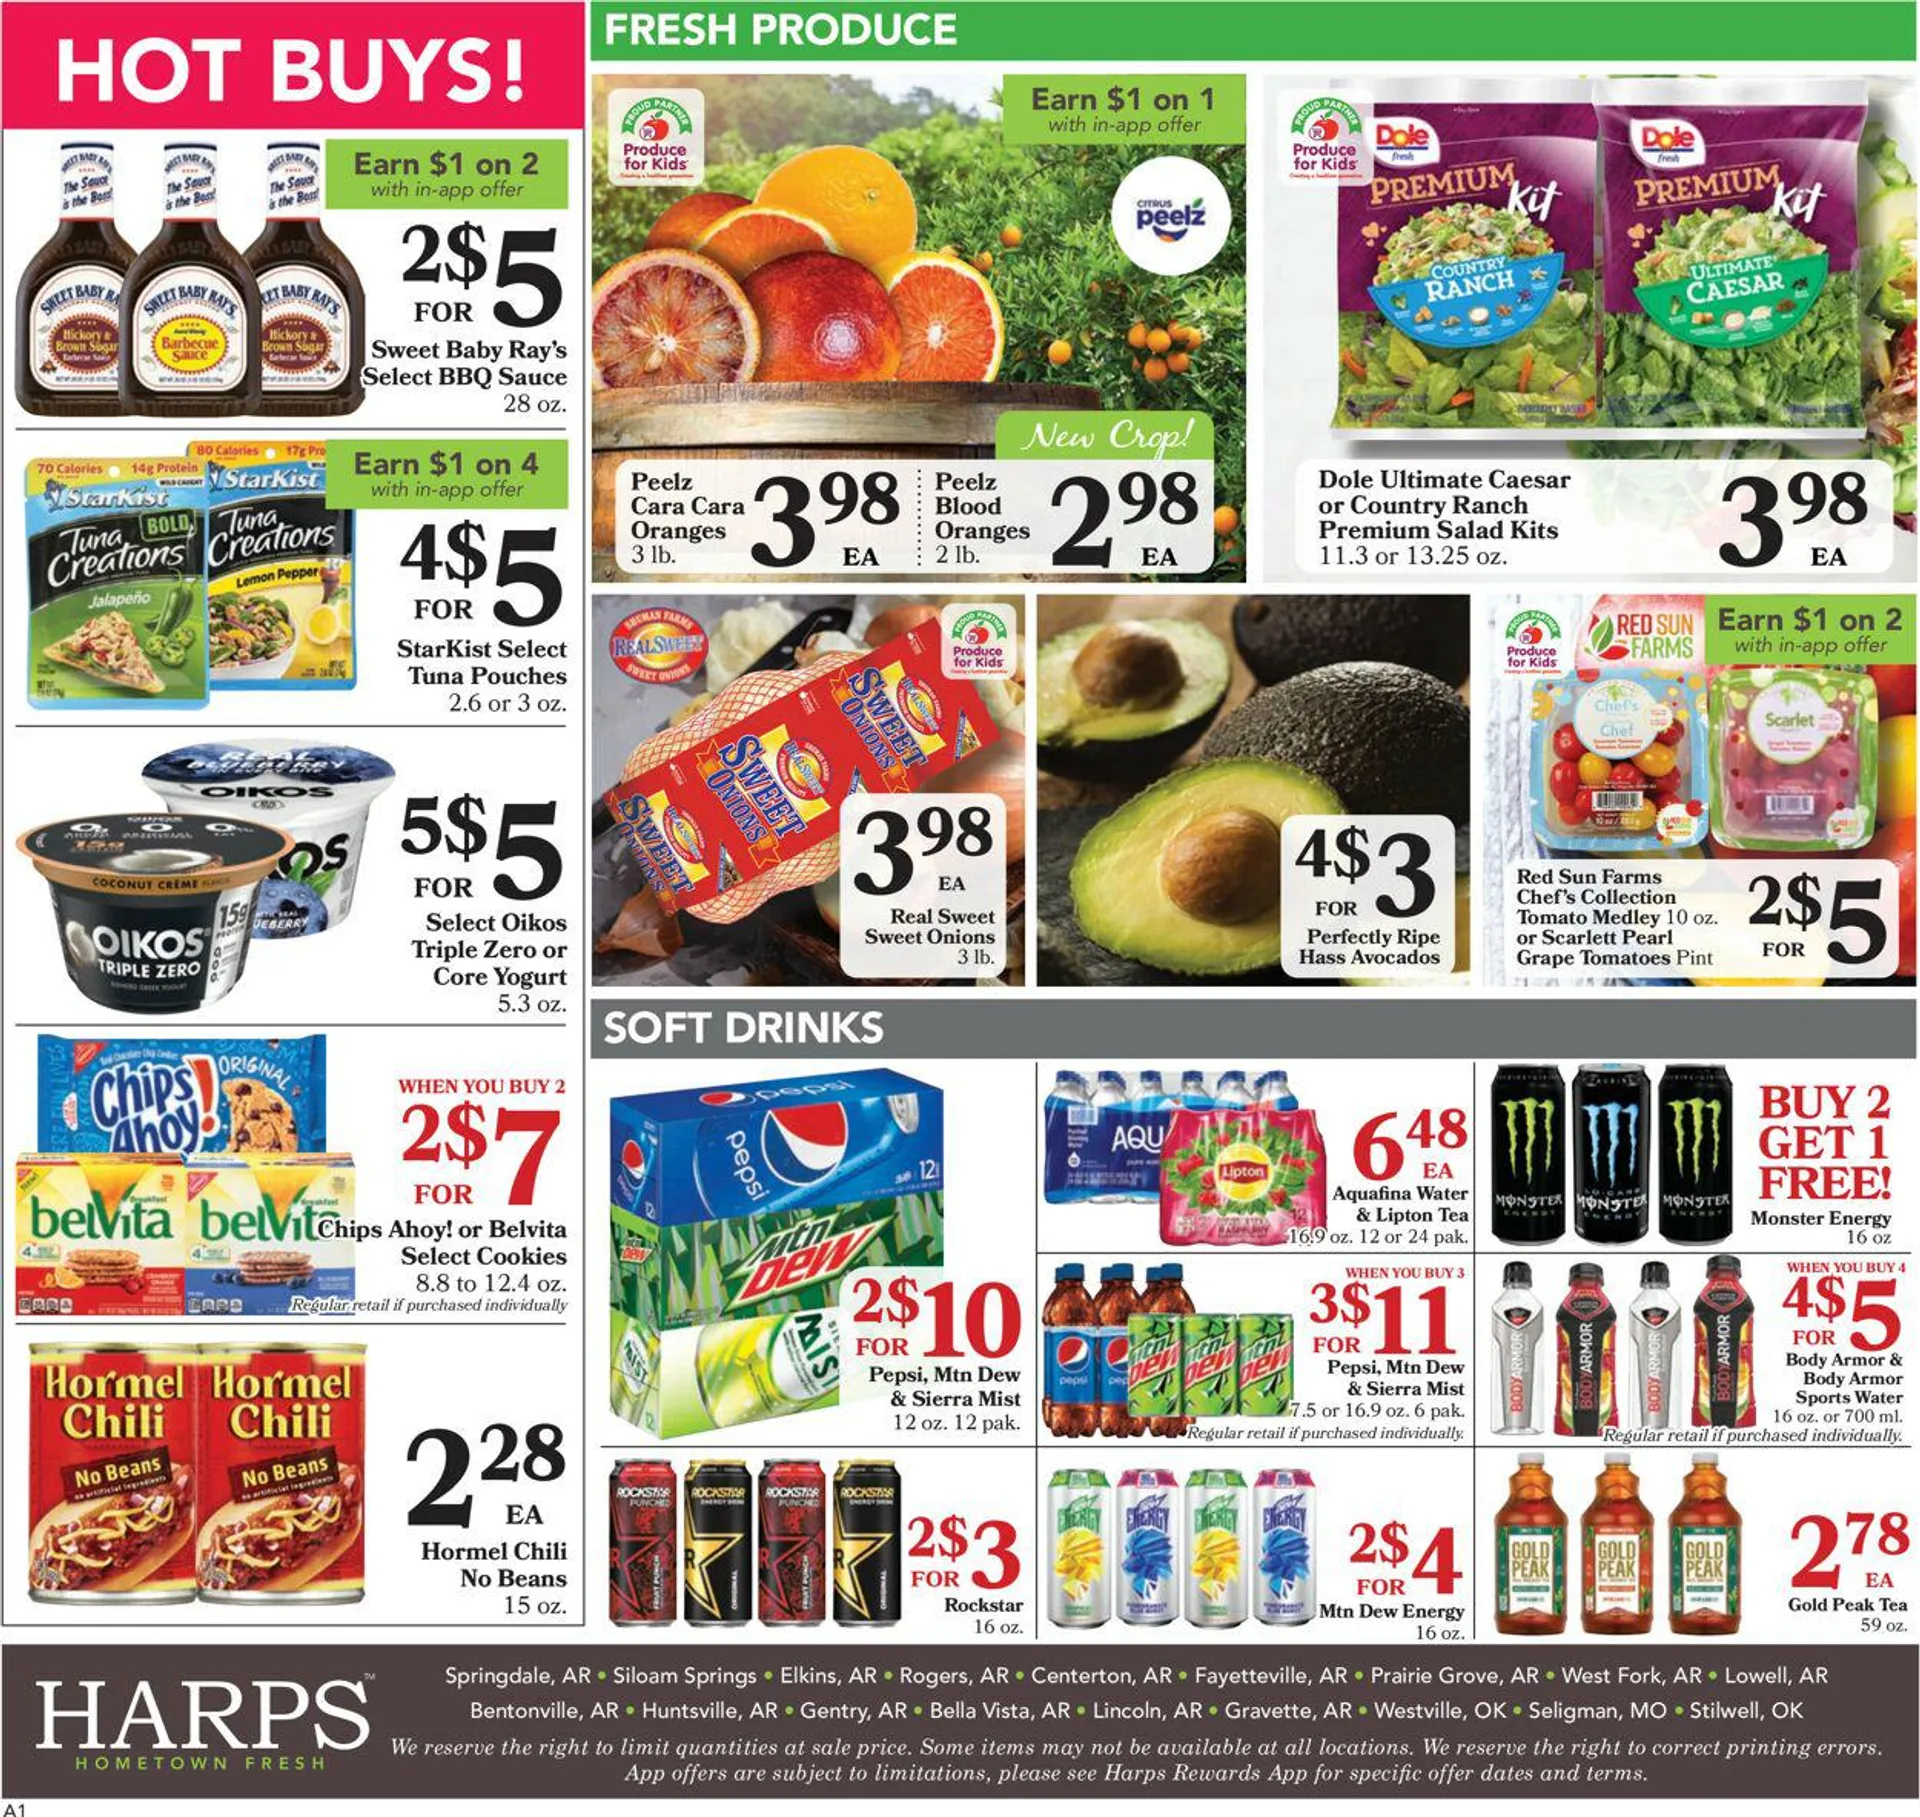 Harps Foods Current weekly ad - 8